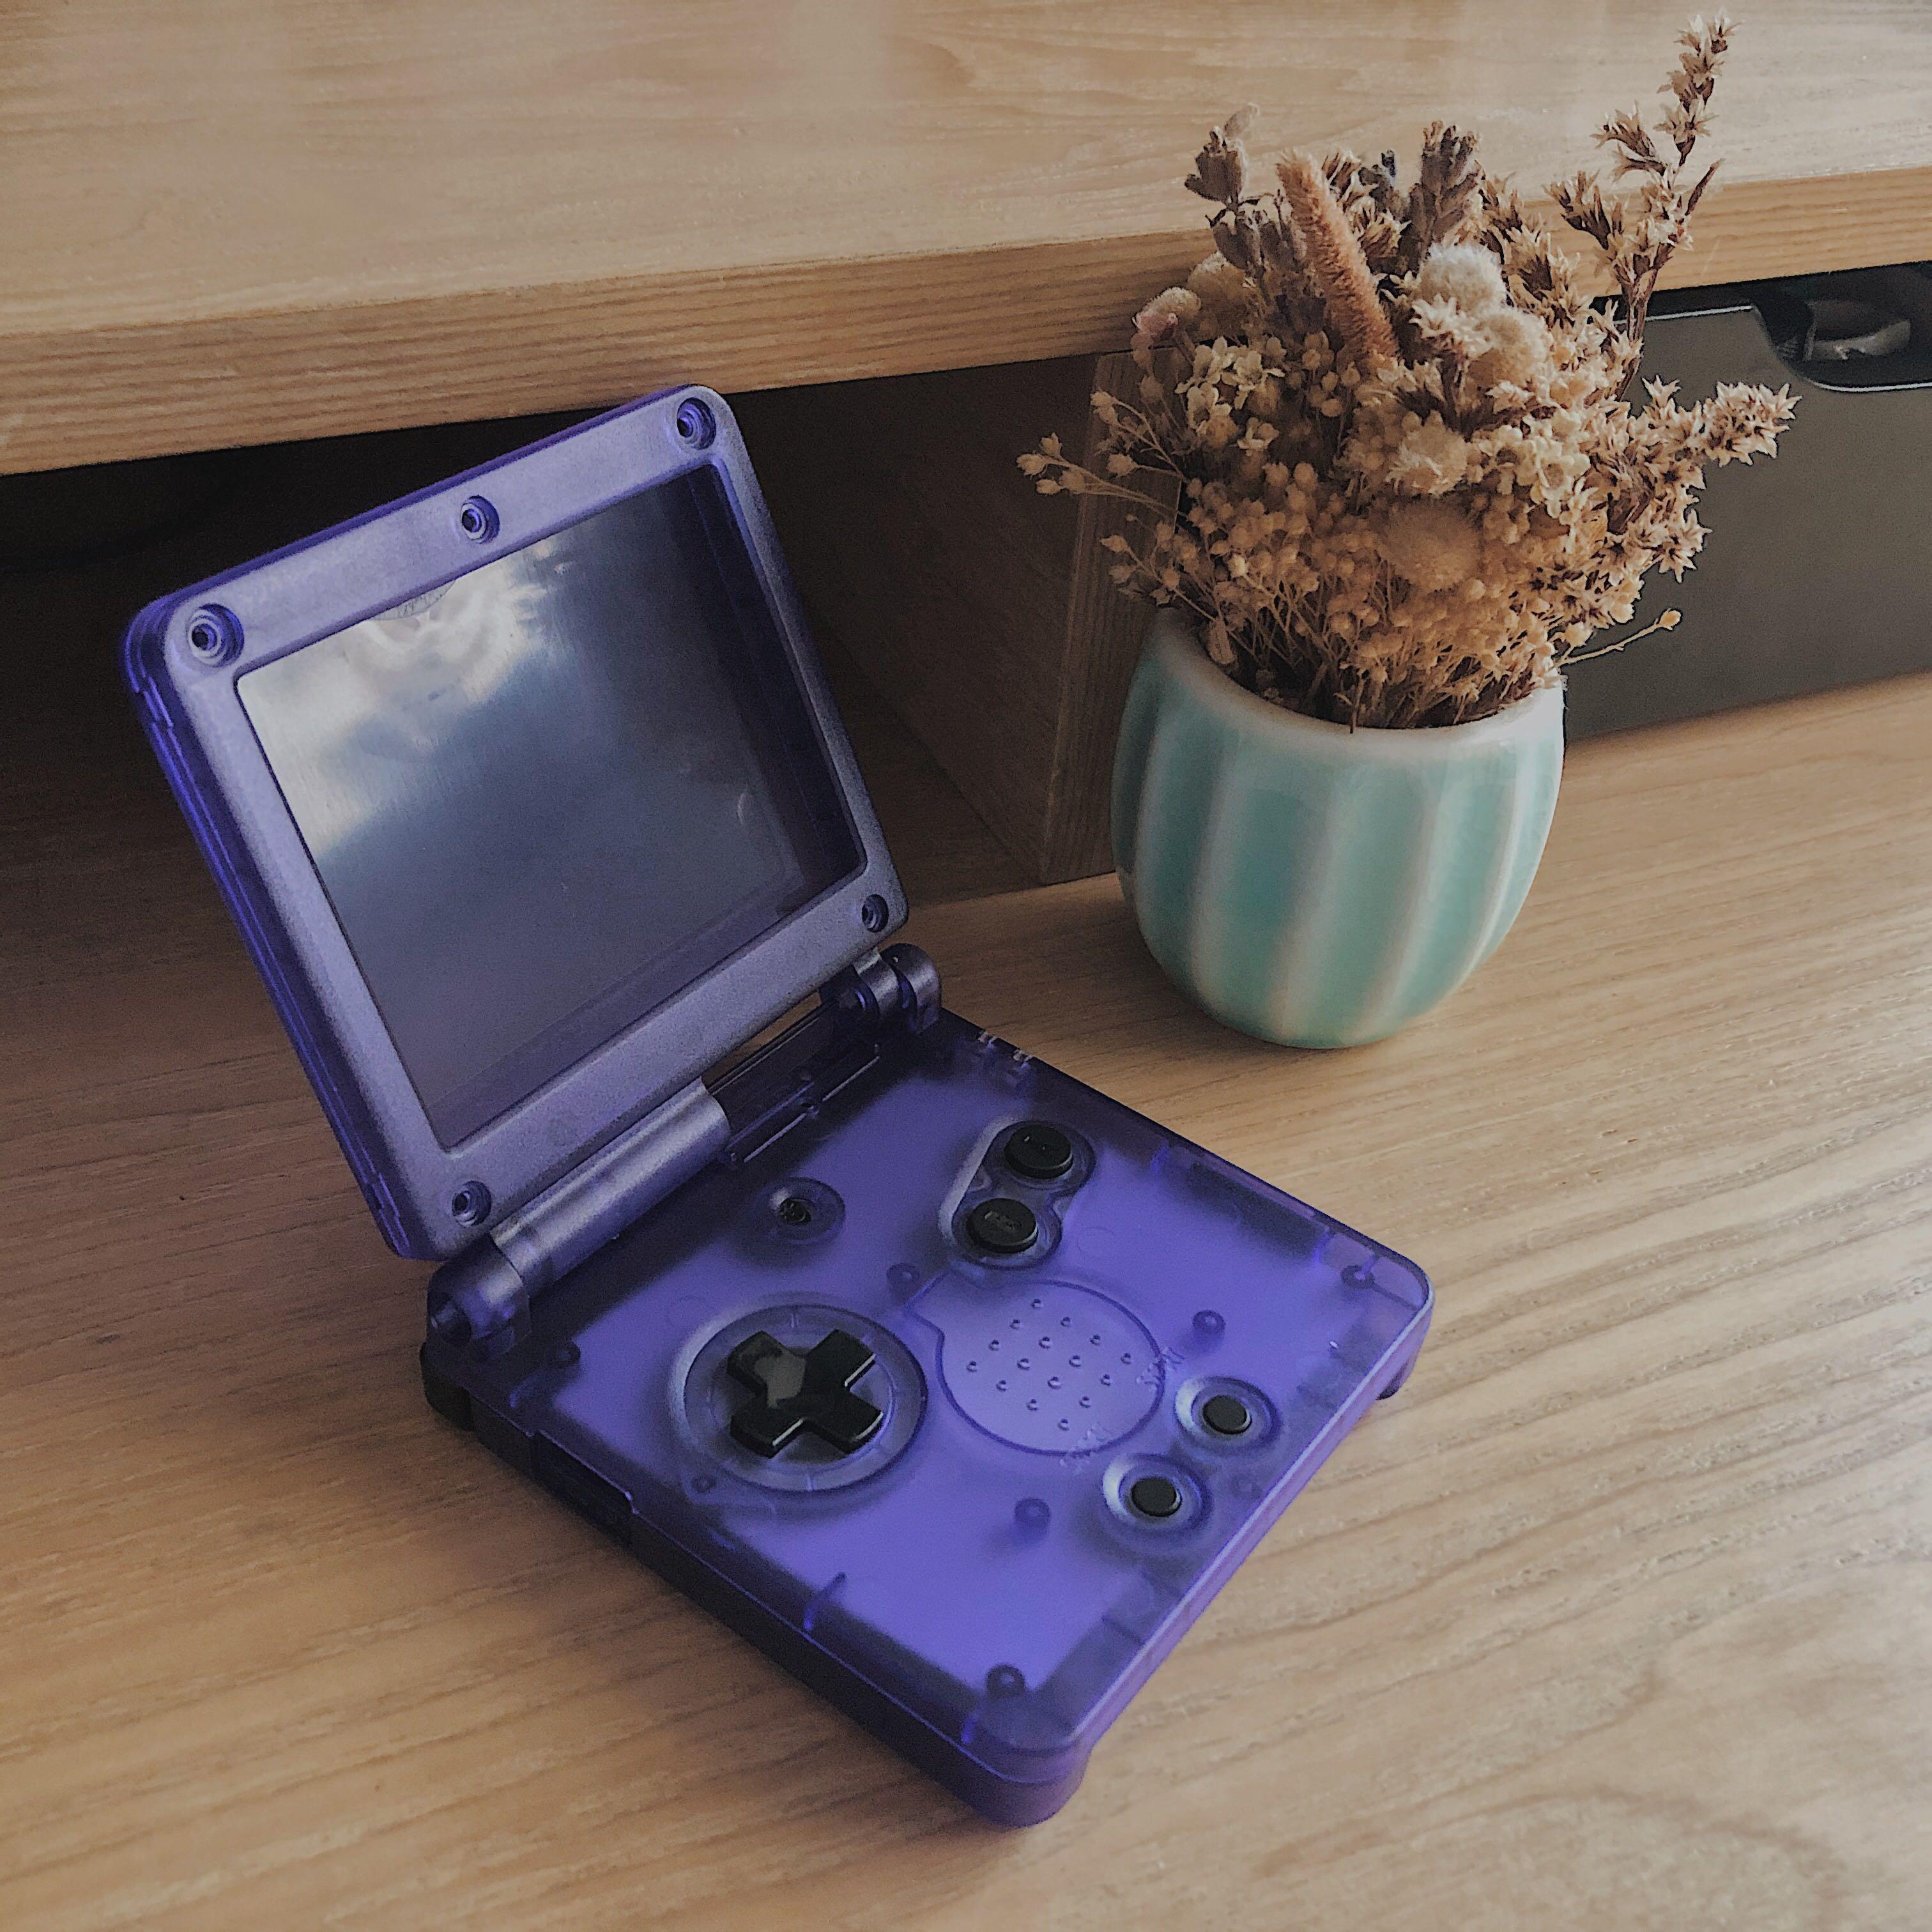 Gengar Shell Gameboy Advance Sp Clear Purple Shell Gba Sp Video Gaming Video Game Consoles Others On Carousell